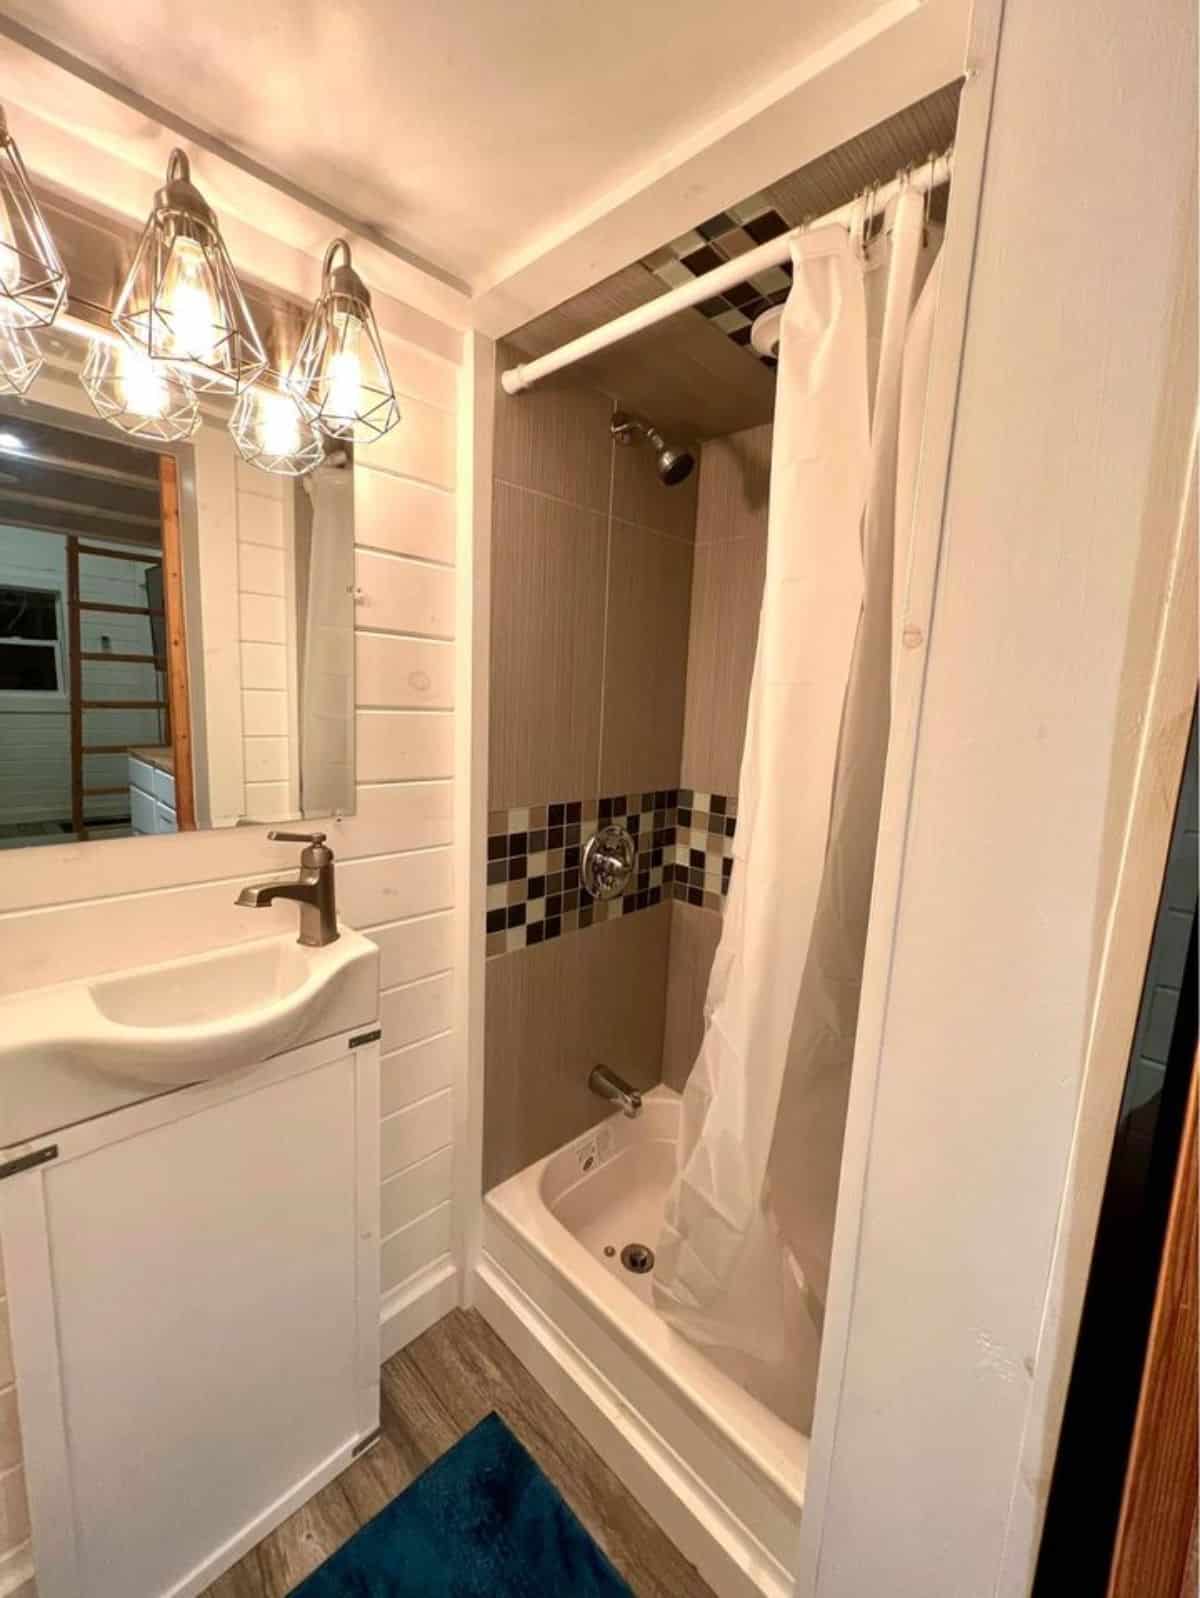 Shower with RV tub in bathroom of 240 sf tiny home